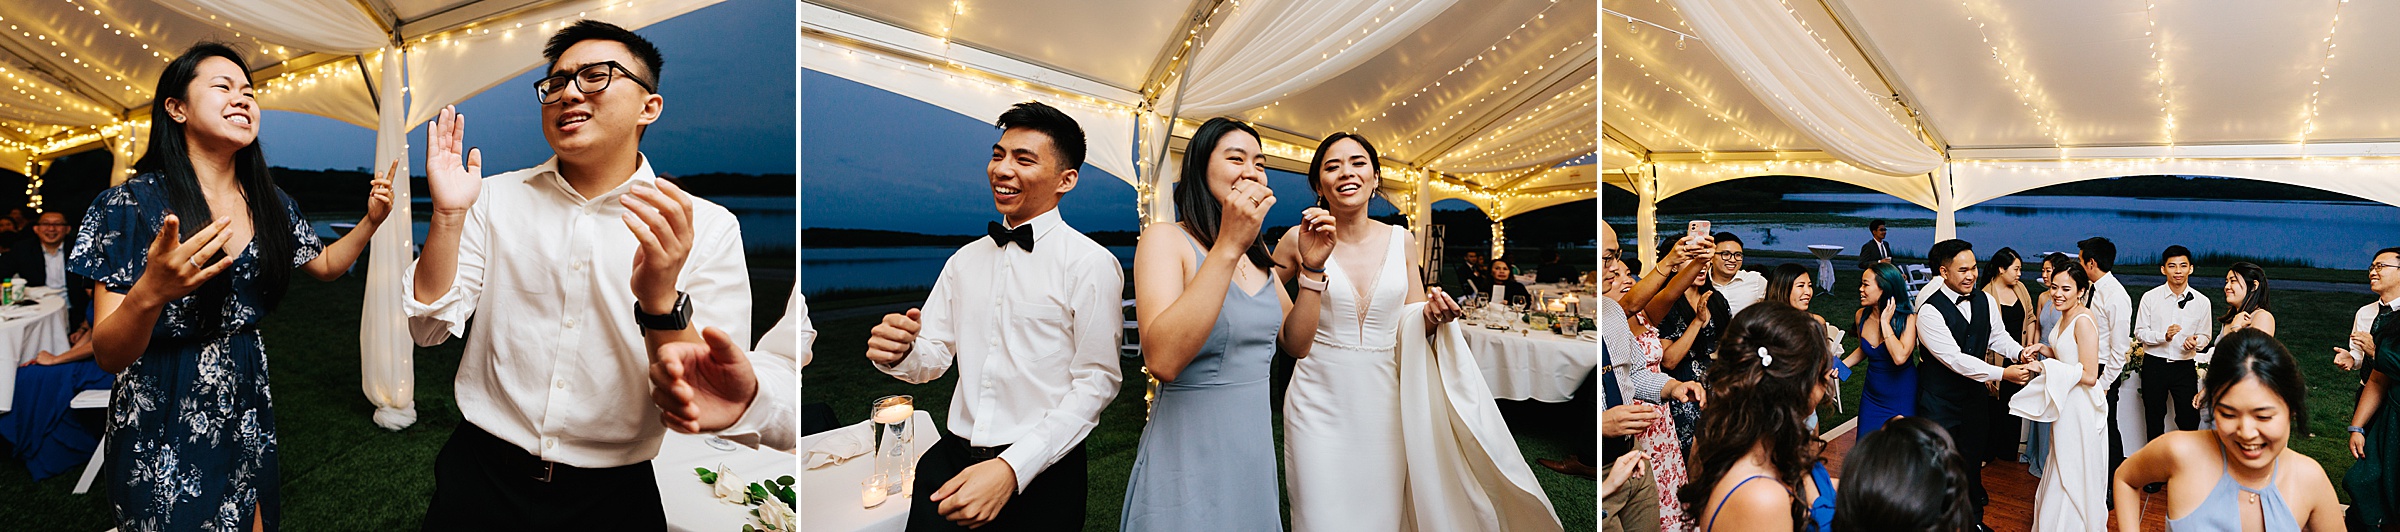 Guests dance and enjoy the outdoor reception by Detroit Wedding Photographer Michele Maloney